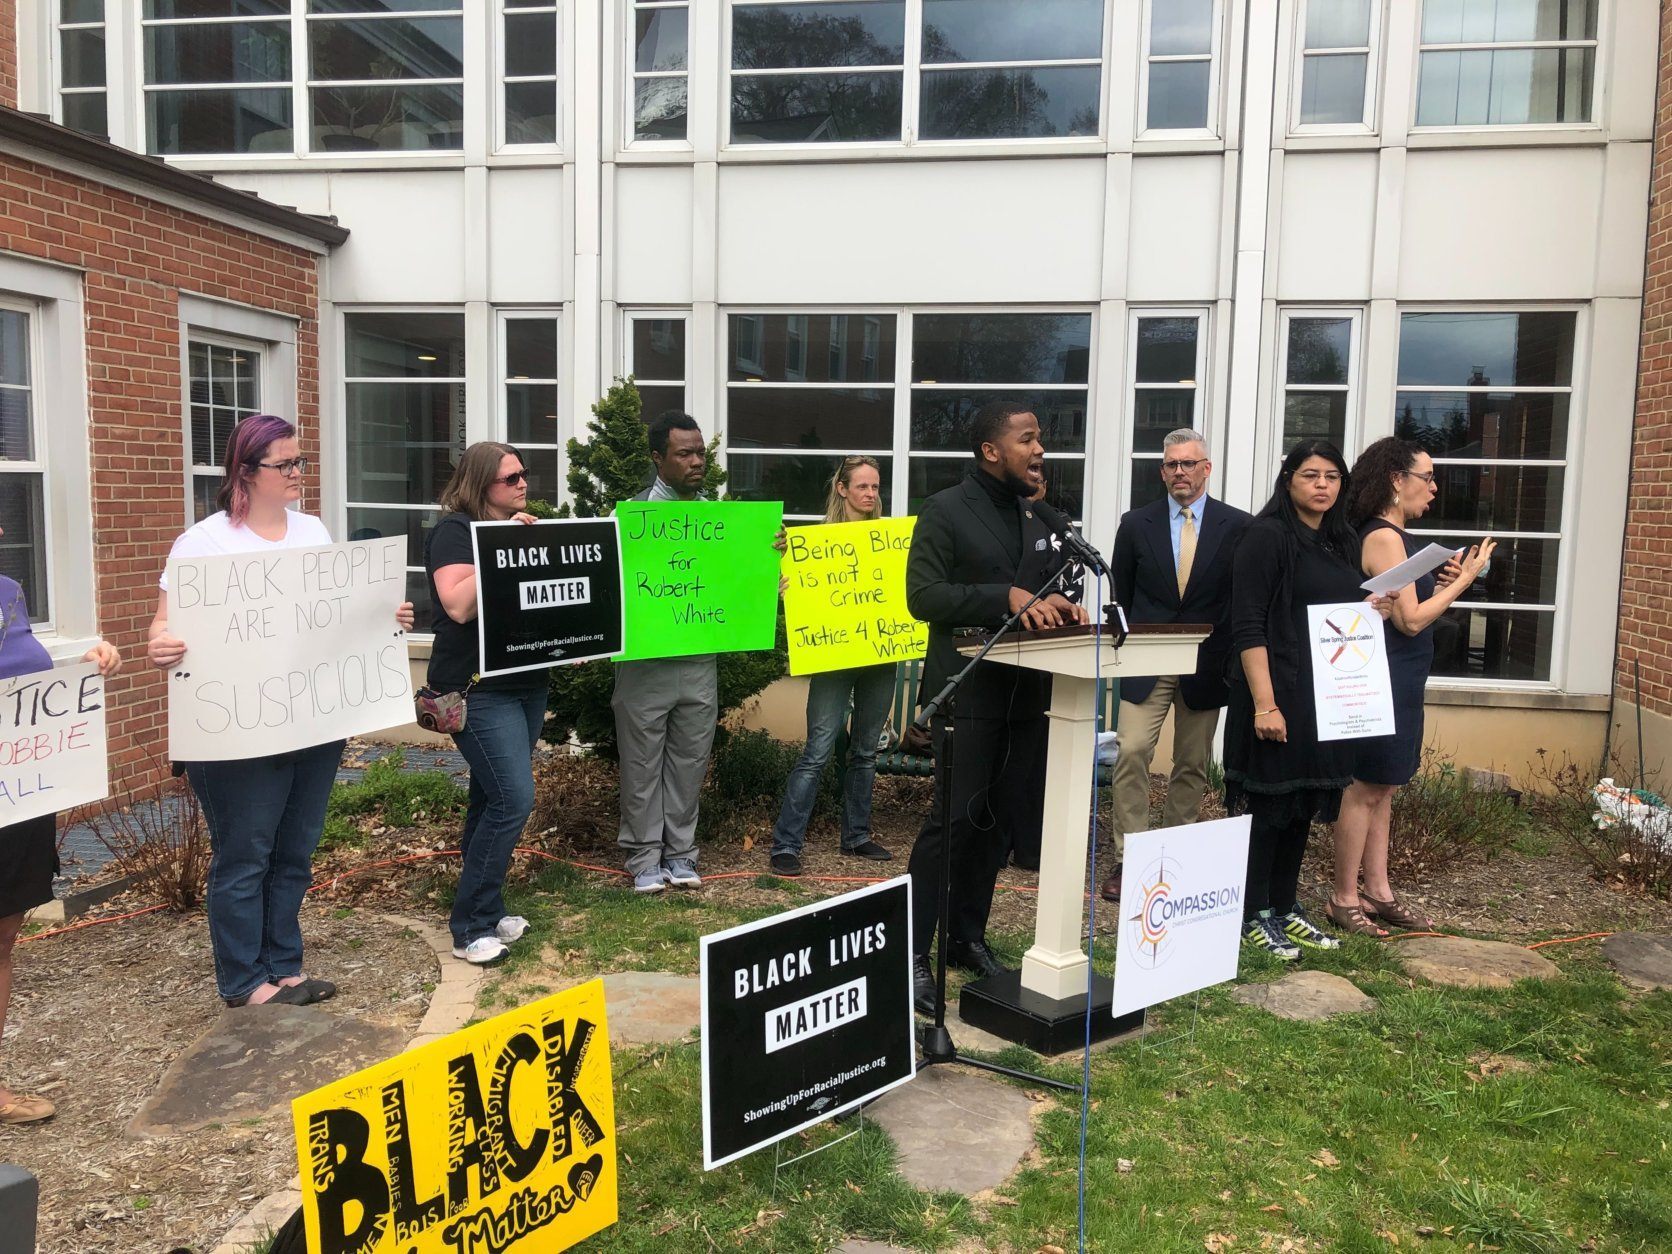 Participants in the walk expressed their anger at the results of an internal investigation, which found last week that the officer was justified in killing White. (WTOP/Mike Murillo)